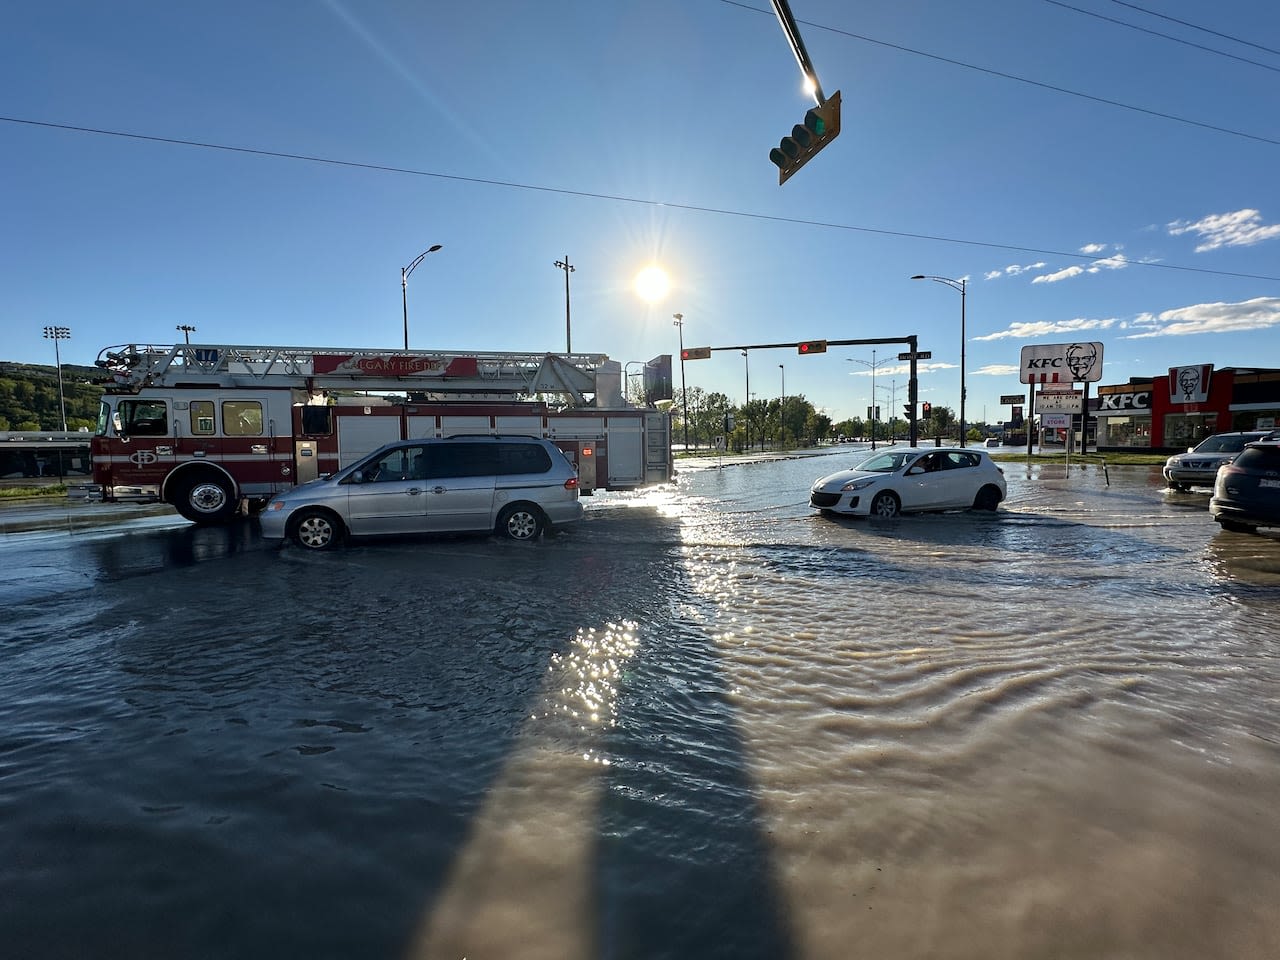 Watermain break in northwest Calgary closes several roads, leaves homes without water